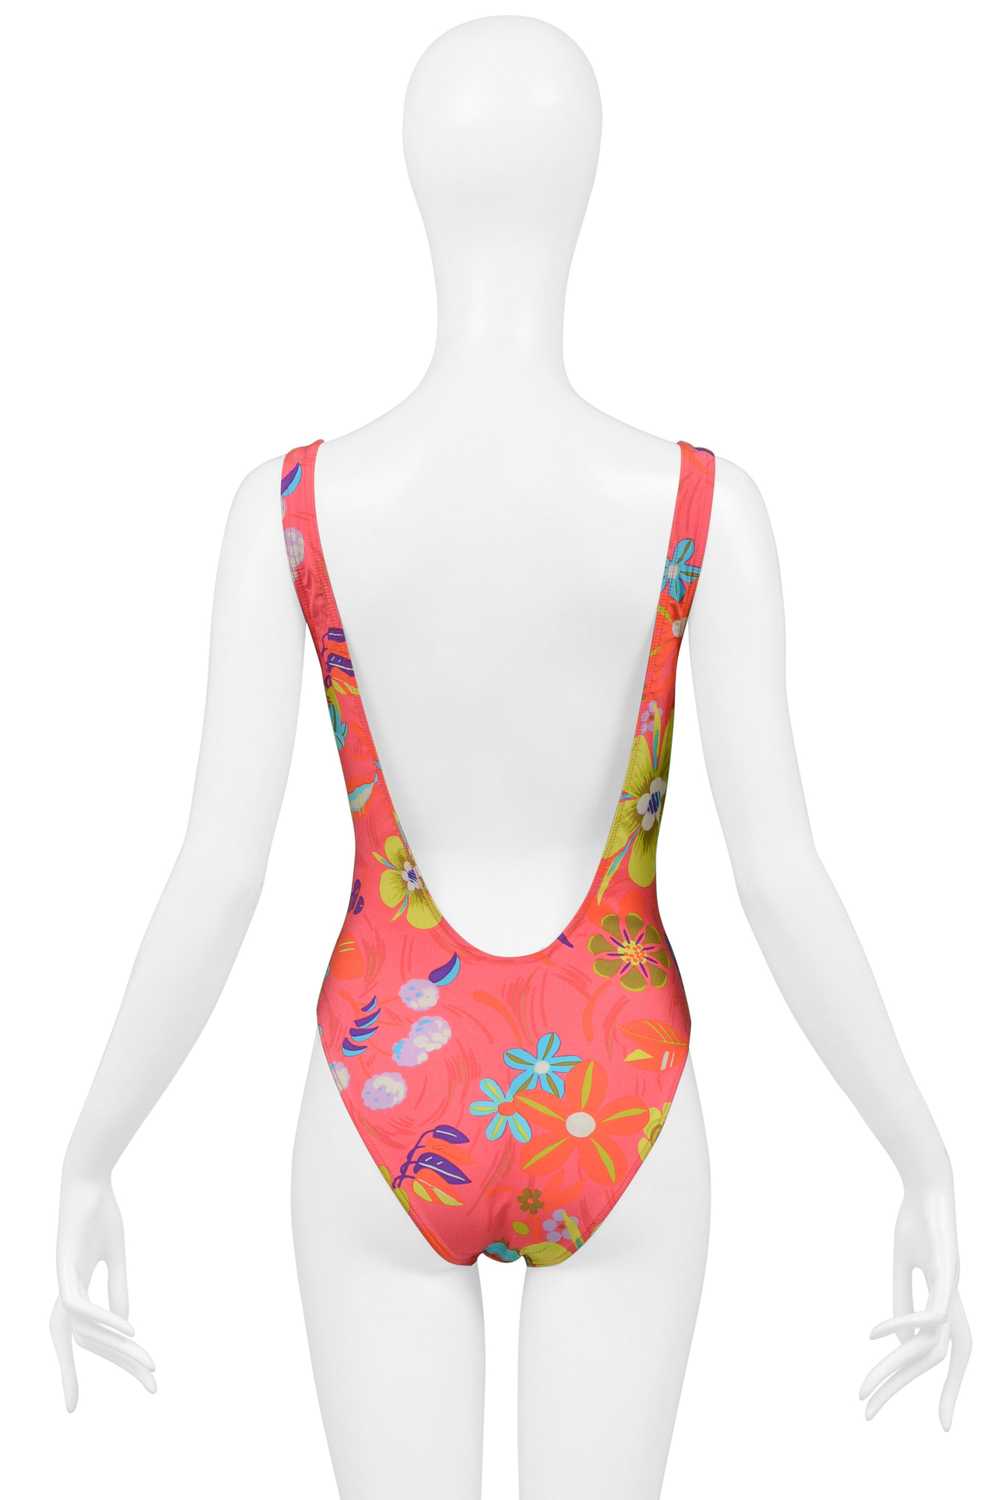 GUCCI BY TOM FORD PINK FLORAL PRINT ONE PIECE SWI… - image 7